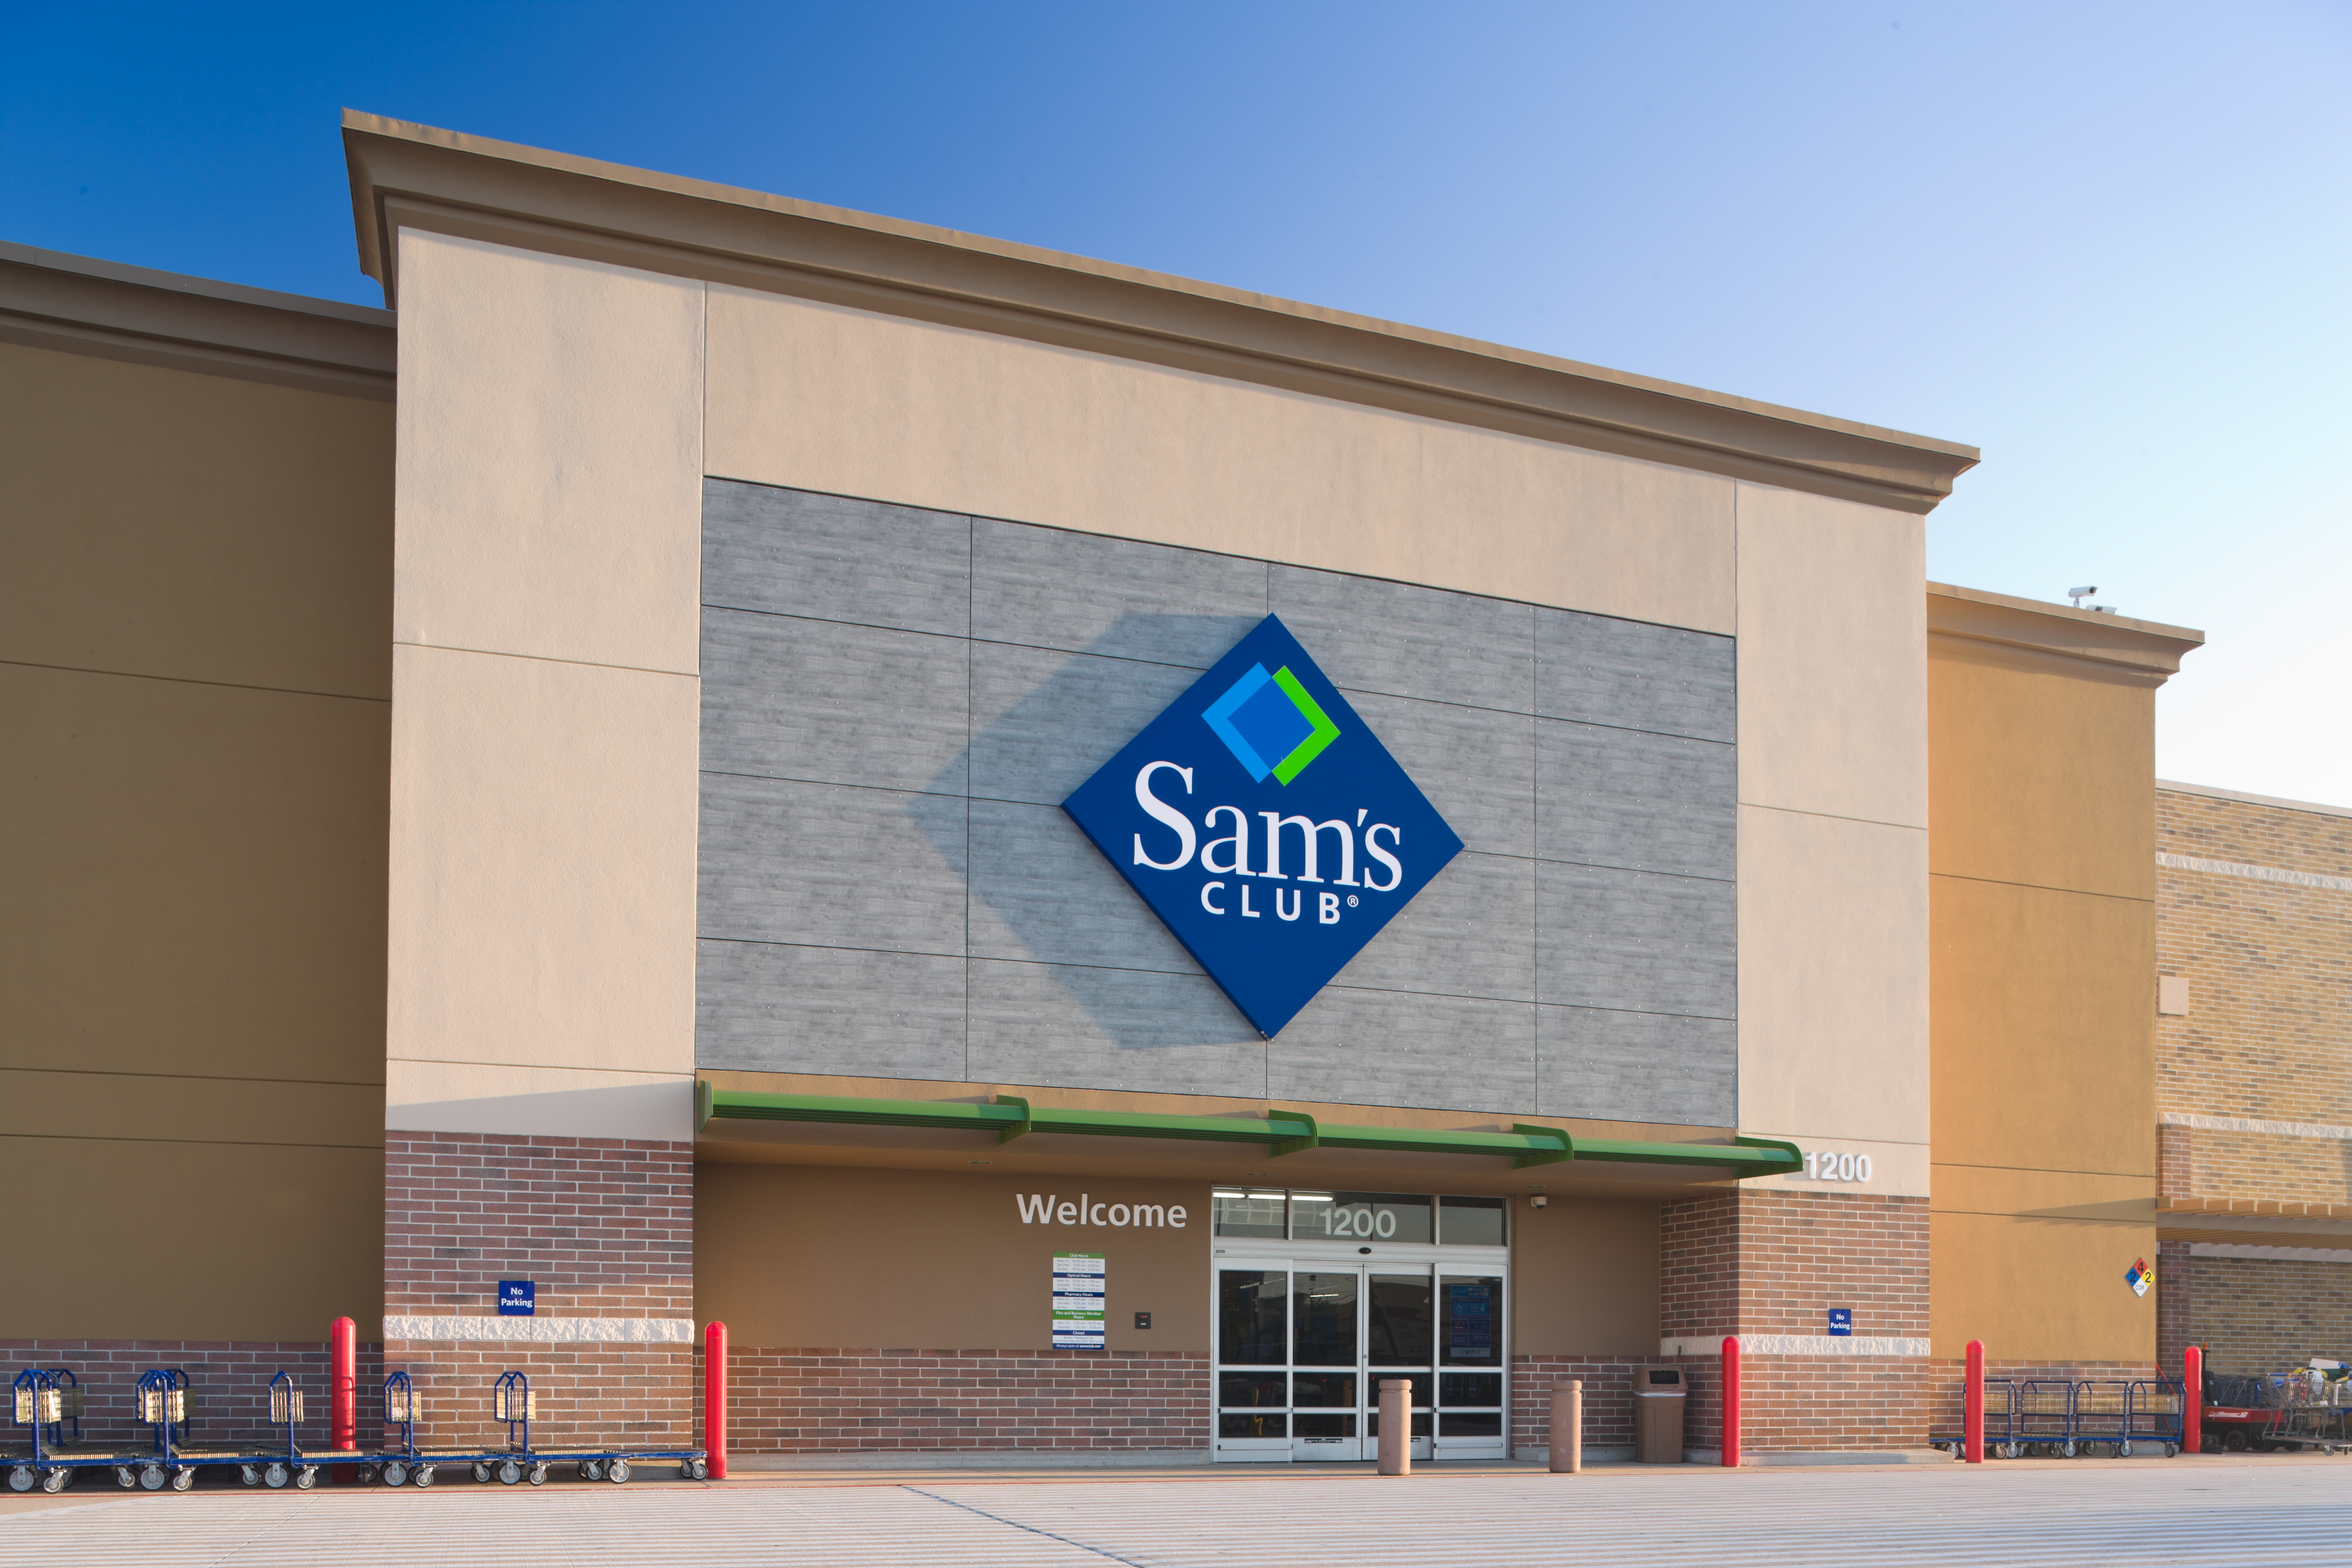 Sam's Club is one of the infamous warehouse clubs where you can great discounts, deals and promos.